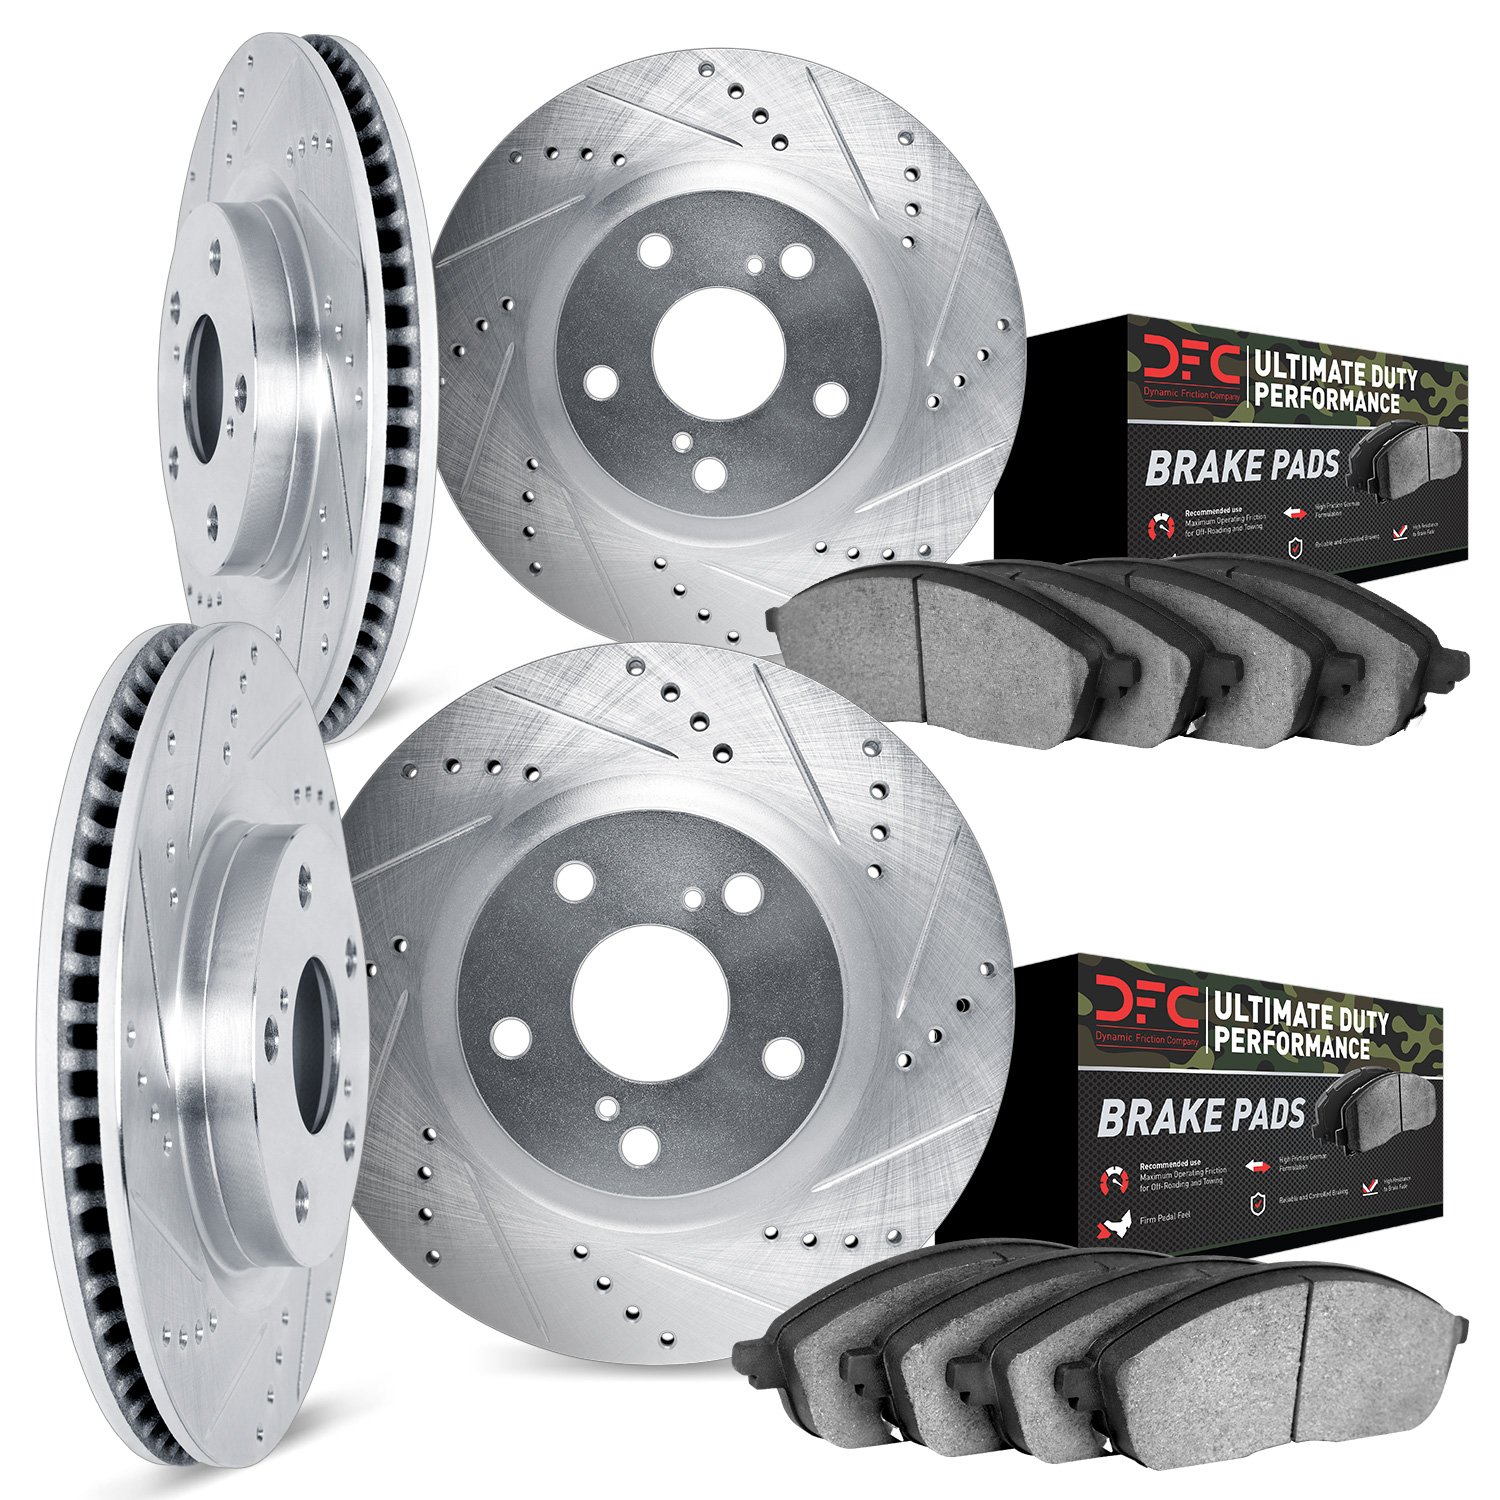 7404-03001 Drilled/Slotted Brake Rotors with Ultimate-Duty Brake Pads Kit [Silver], 2010-2016 Kia/Hyundai/Genesis, Position: Fro